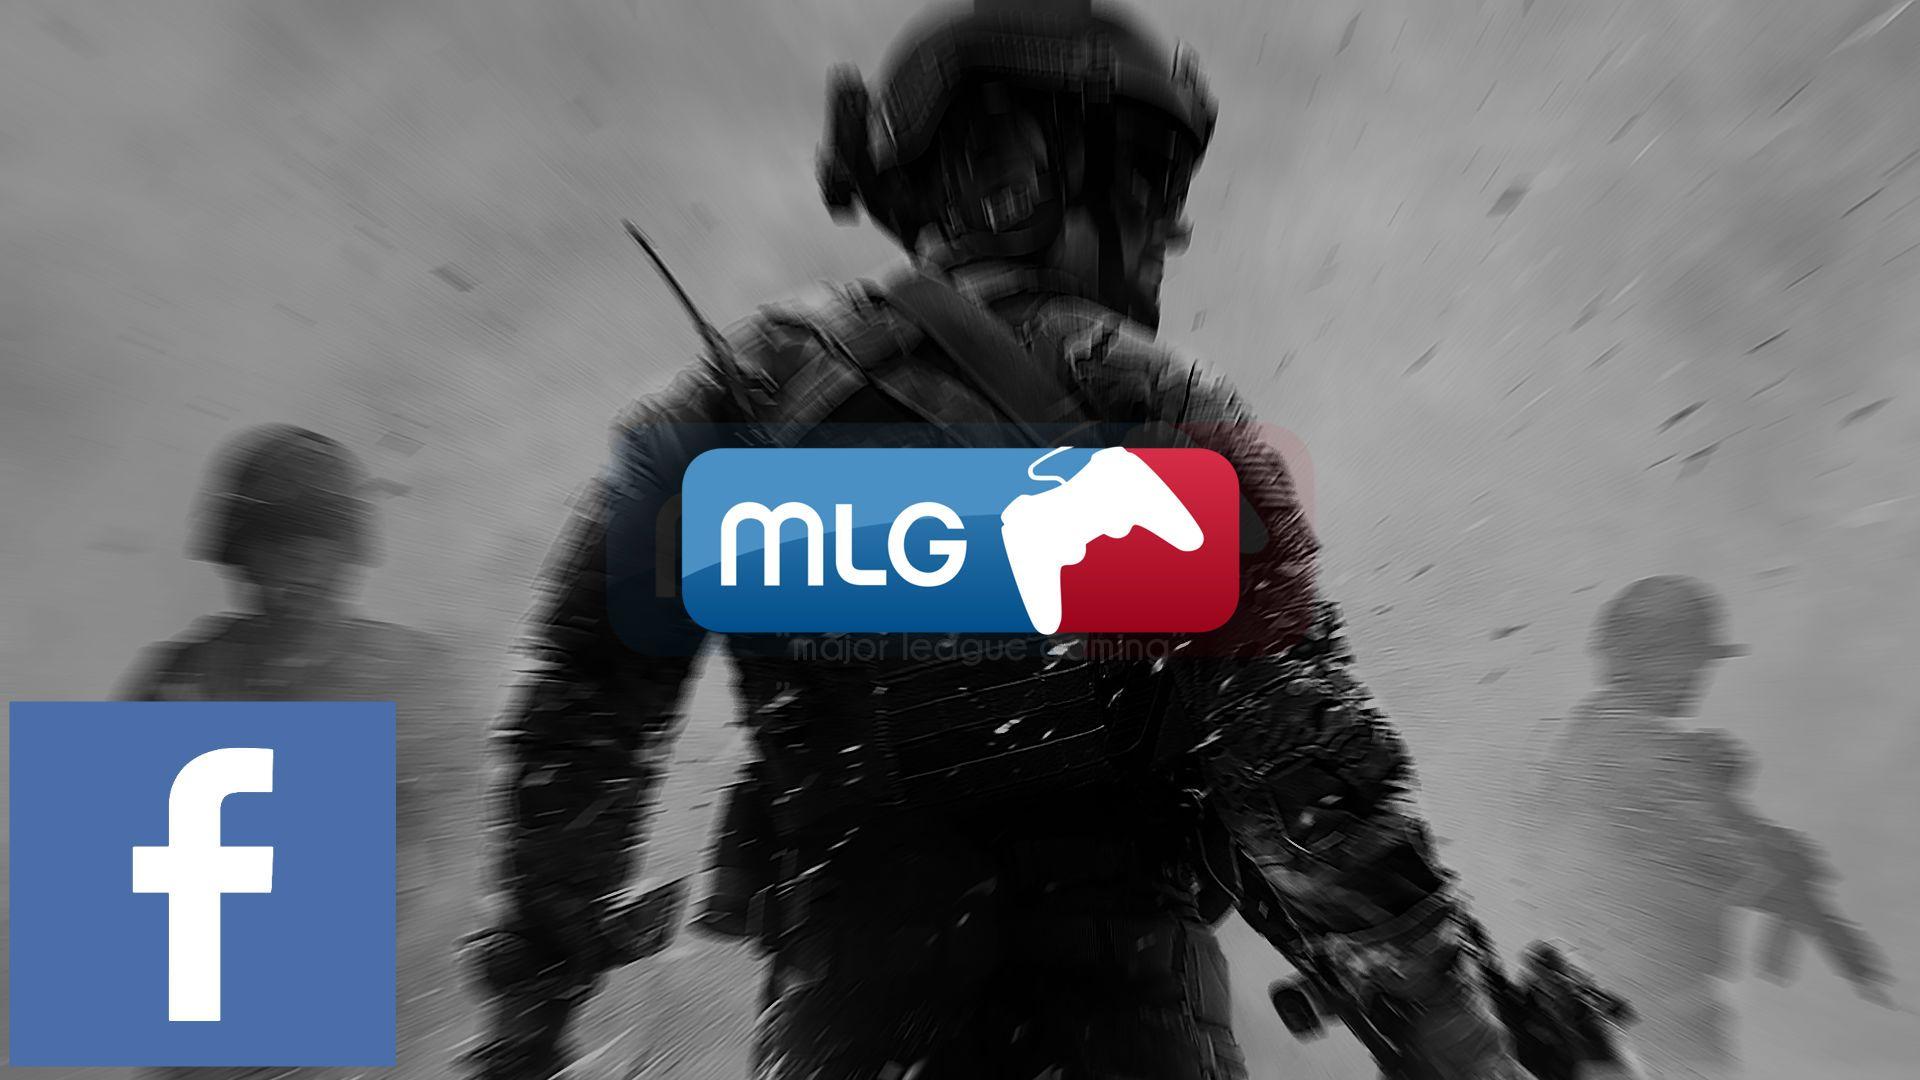 Facebook Partners with Major League Gaming for eSports